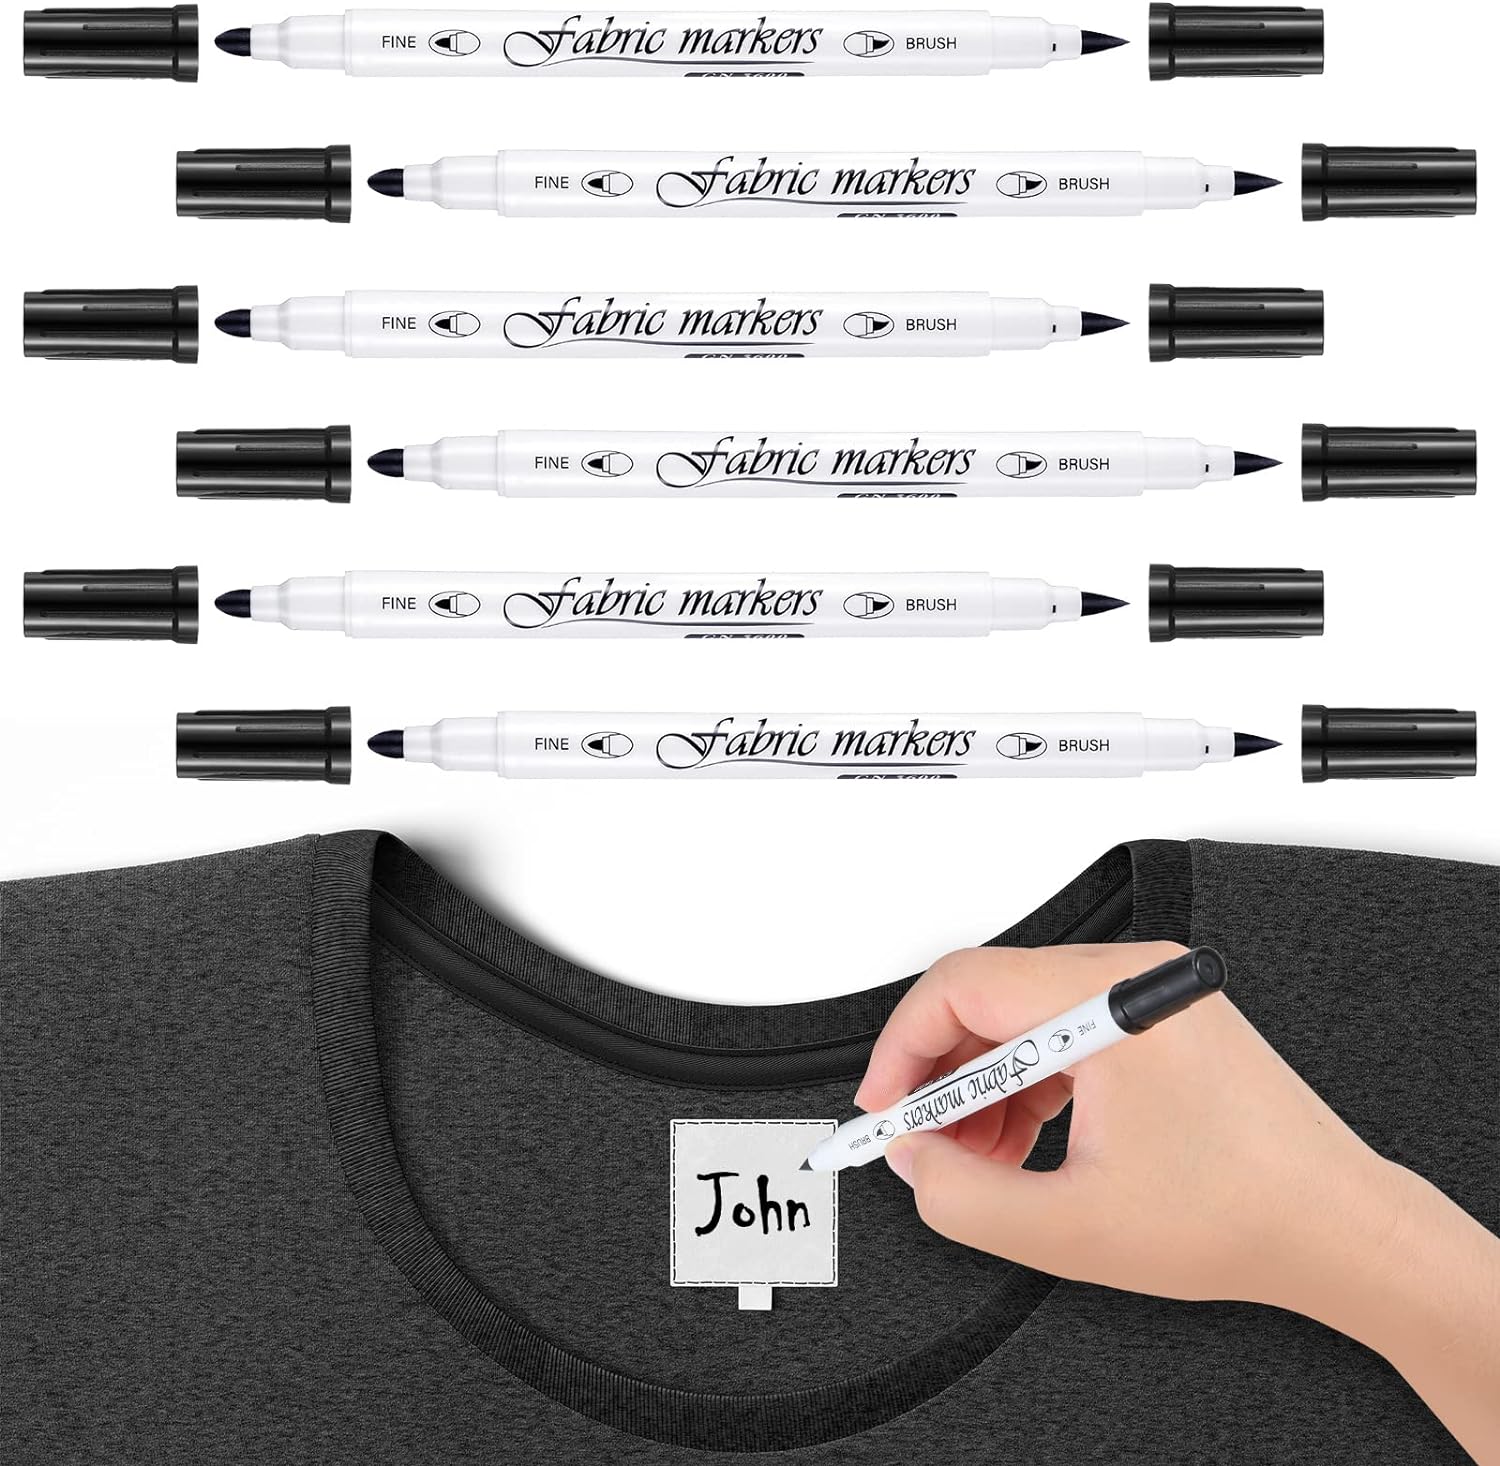 Guangna 6Pcs Fabric Markers Double Ended White Black Color - TTpen